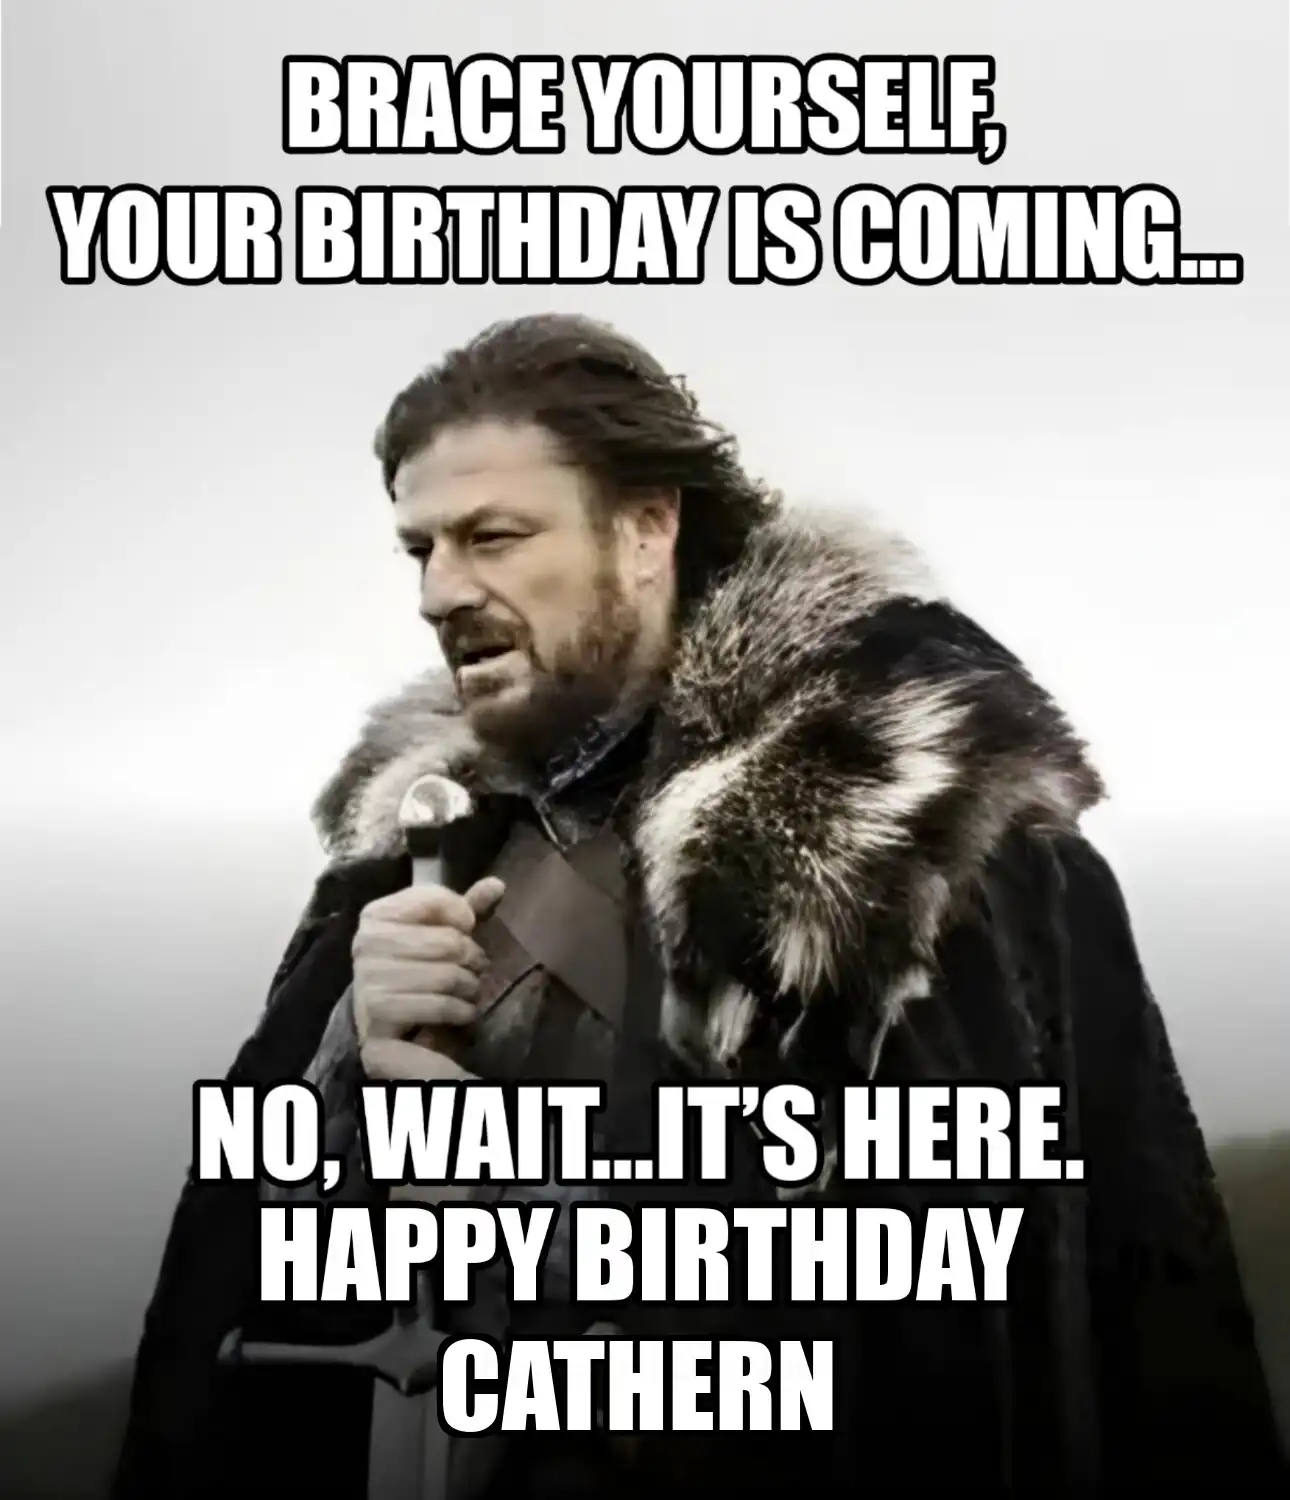 Happy Birthday Cathern Brace Yourself Your Birthday Is Coming Meme